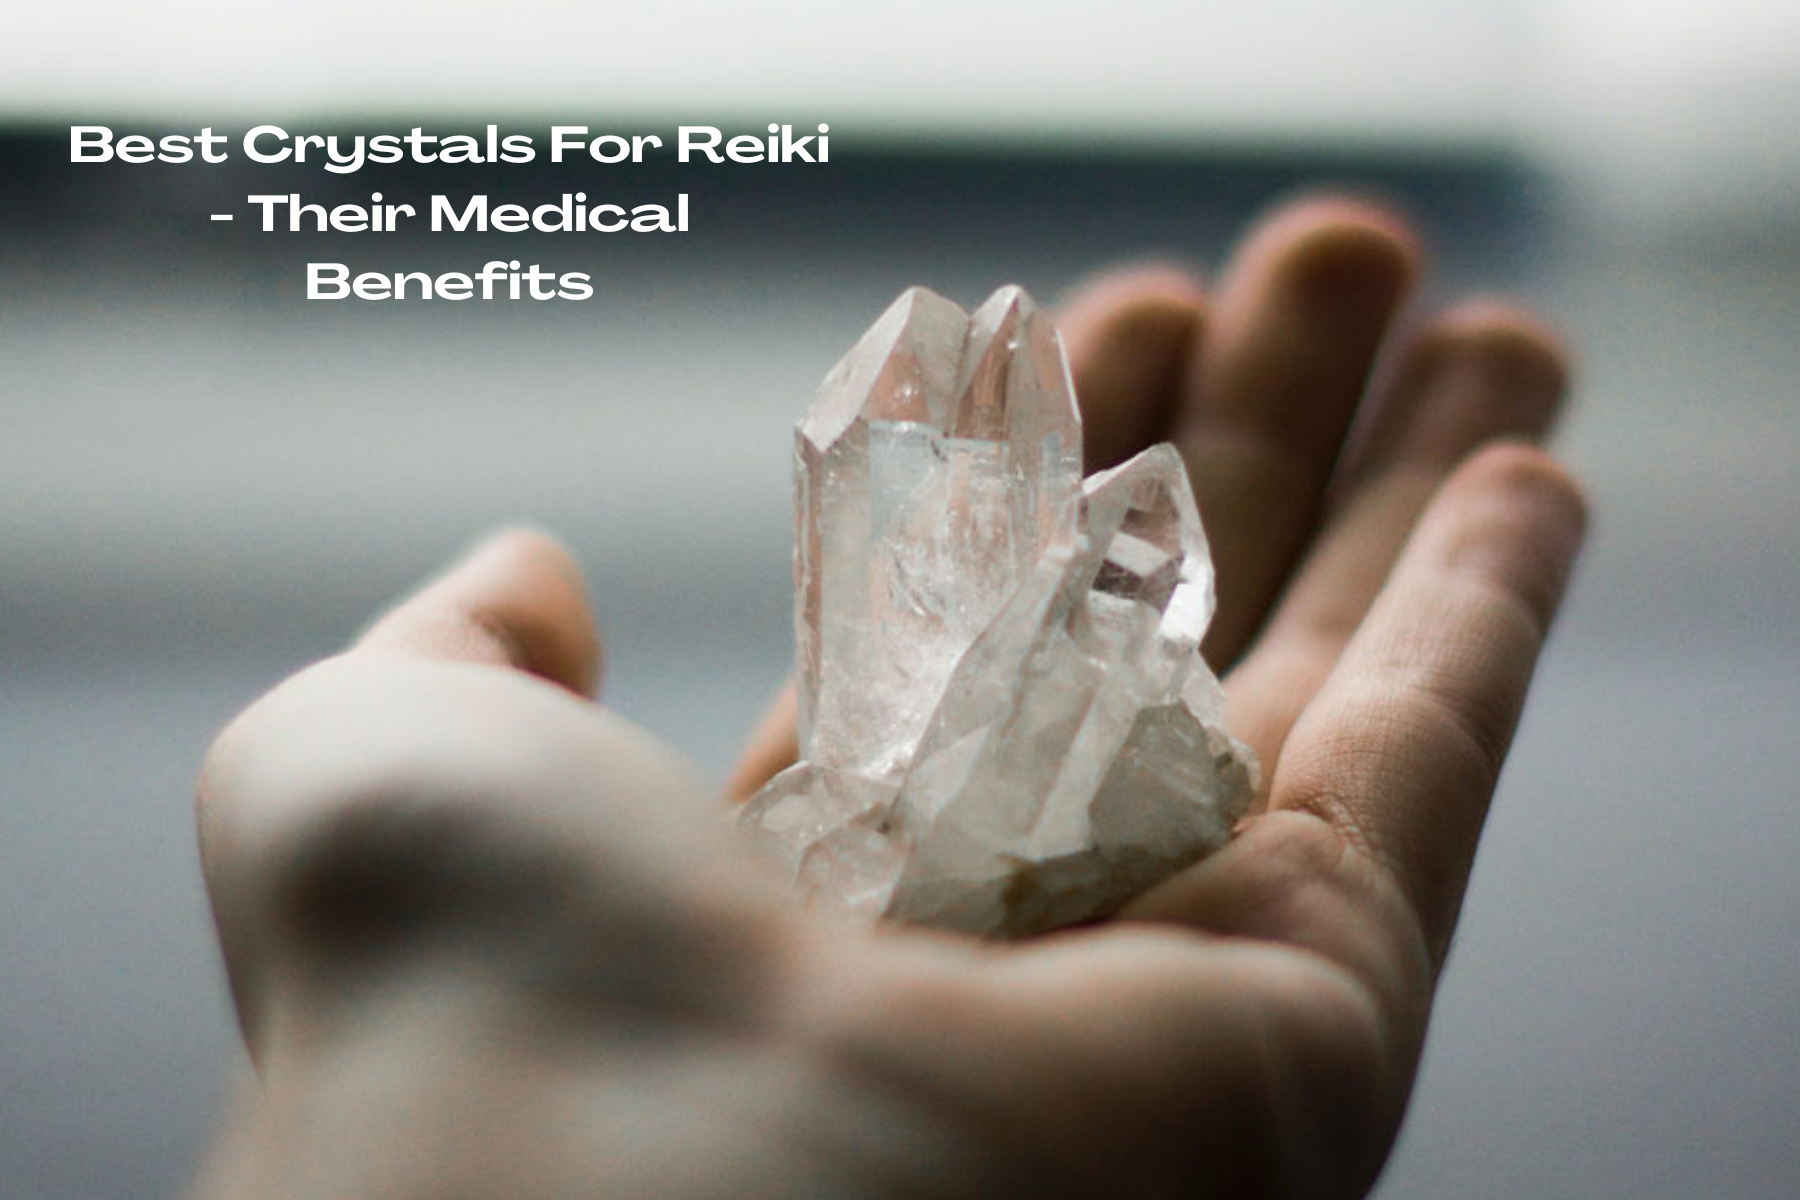 Best Crystals For Reiki And Their Medical Benefits